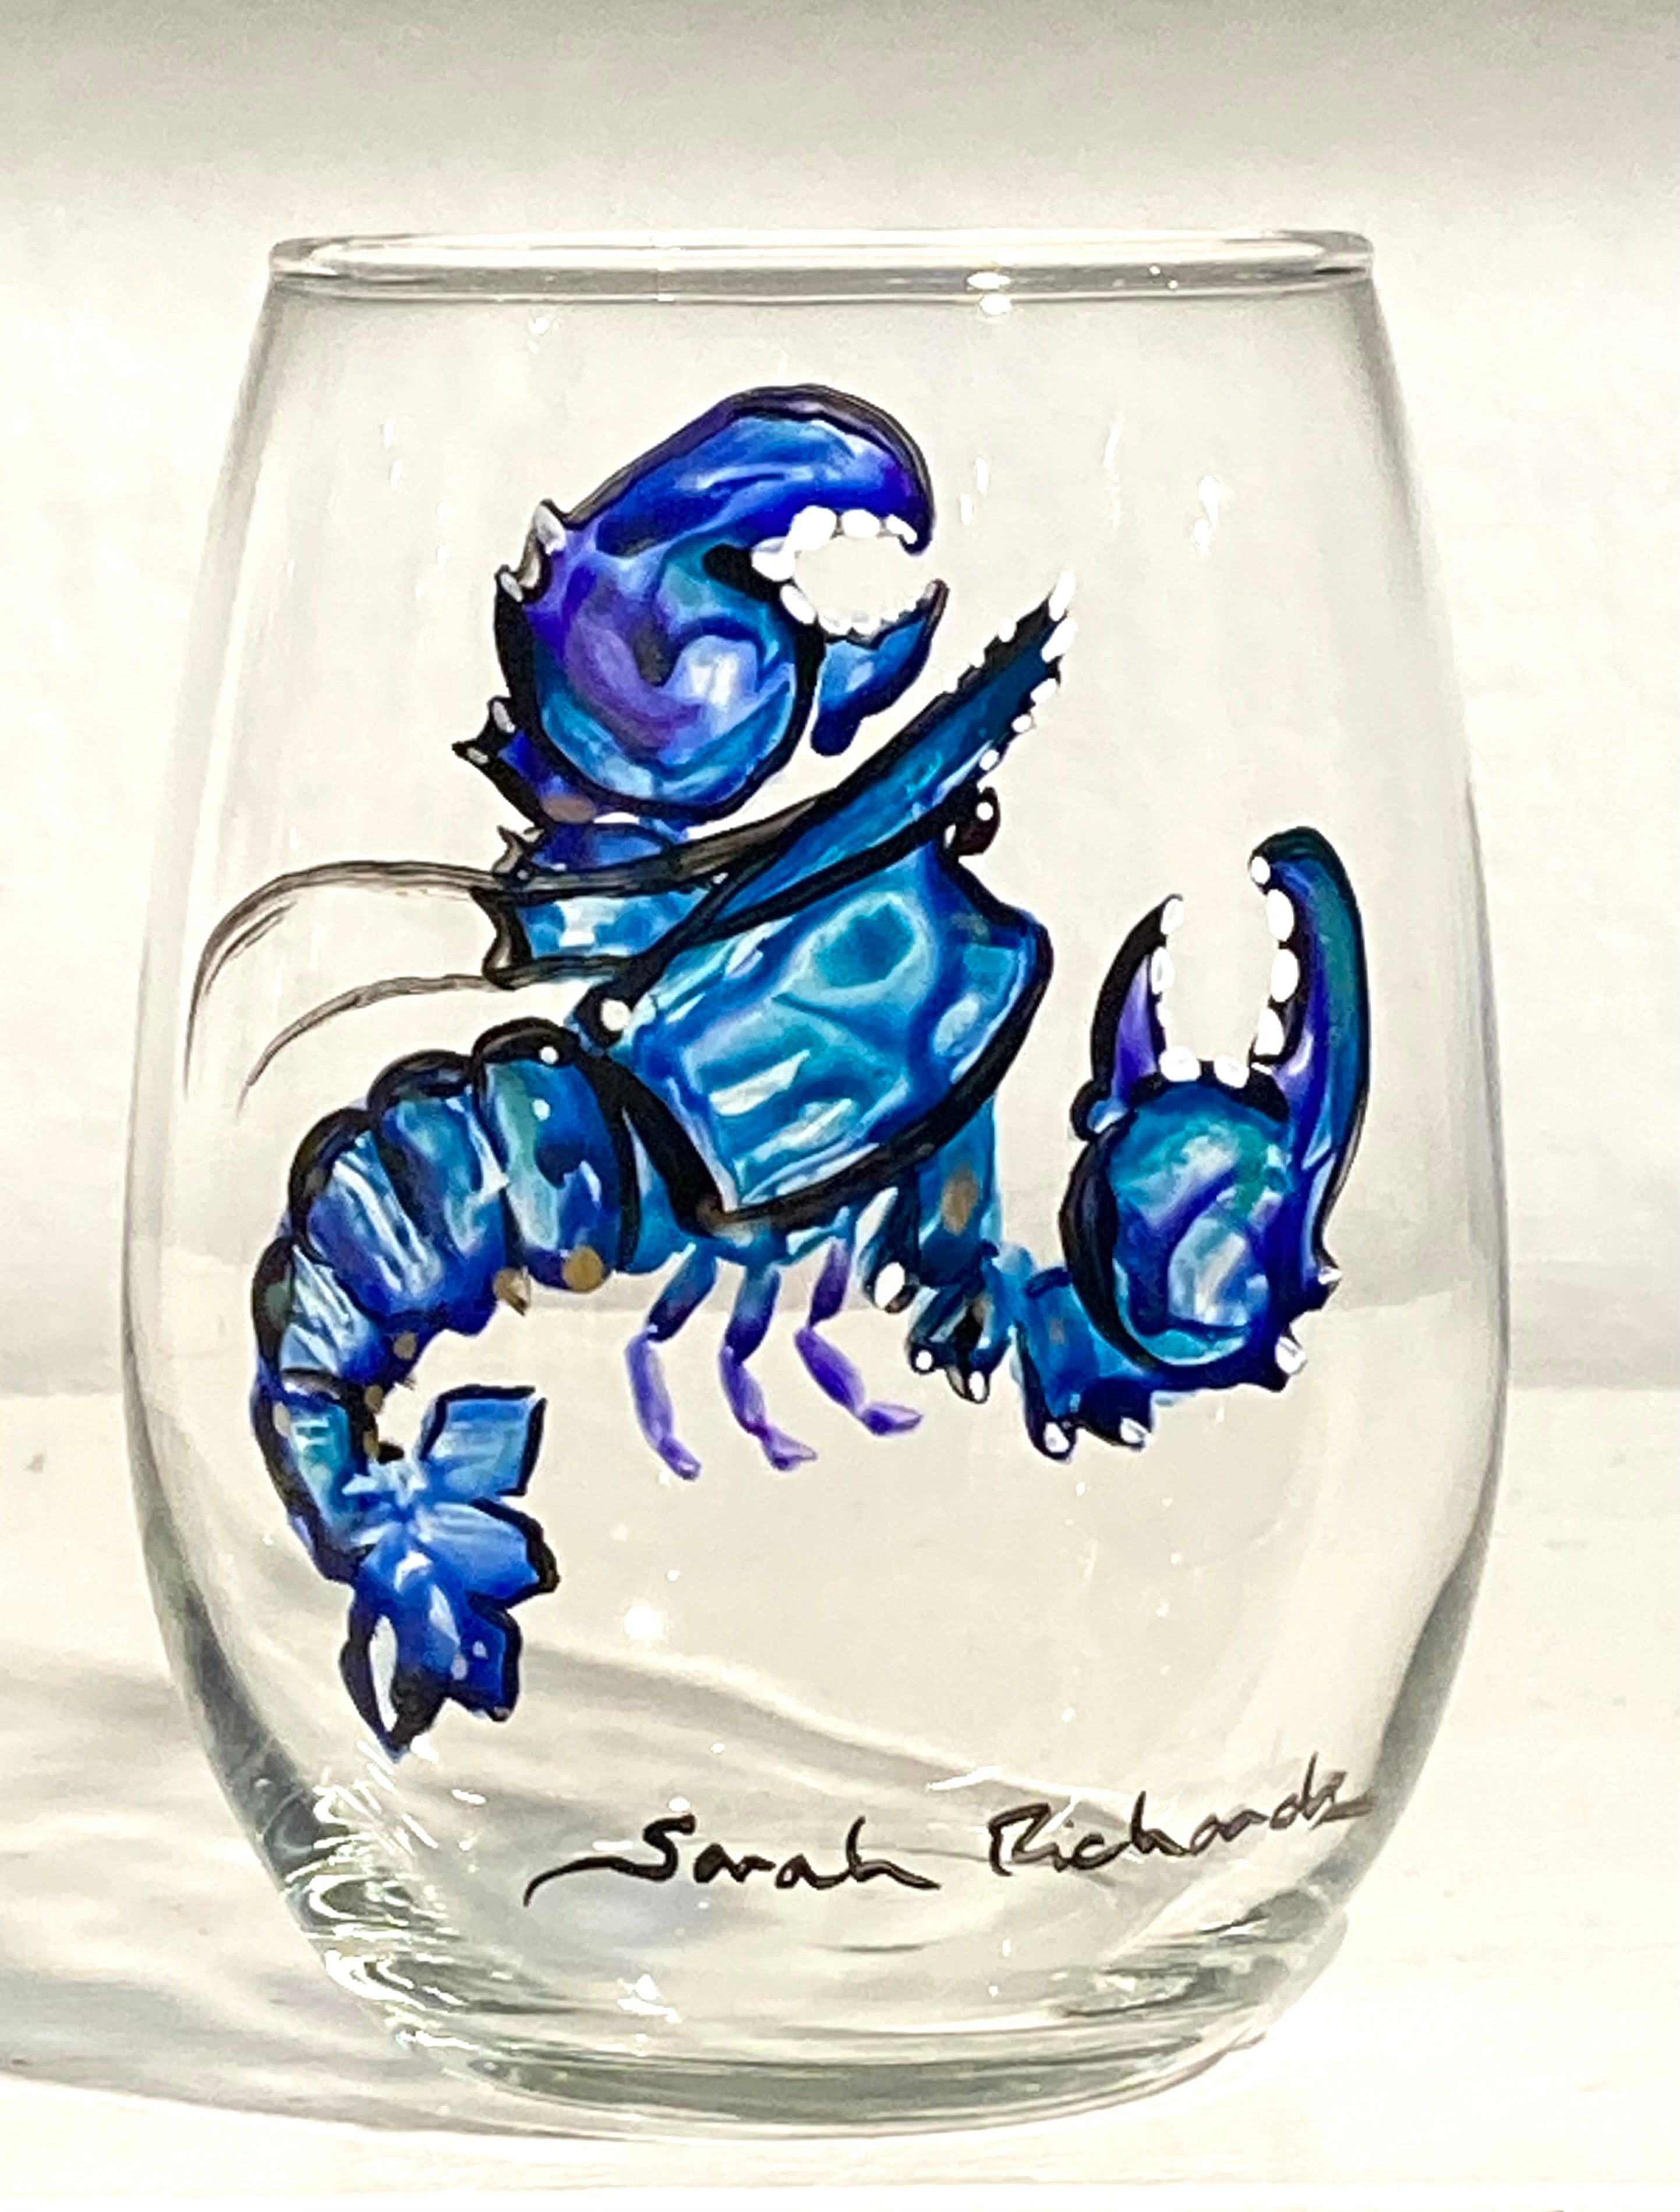 Hand-painted Wine Glass (stemless); non-equine image - Sarah Lynn